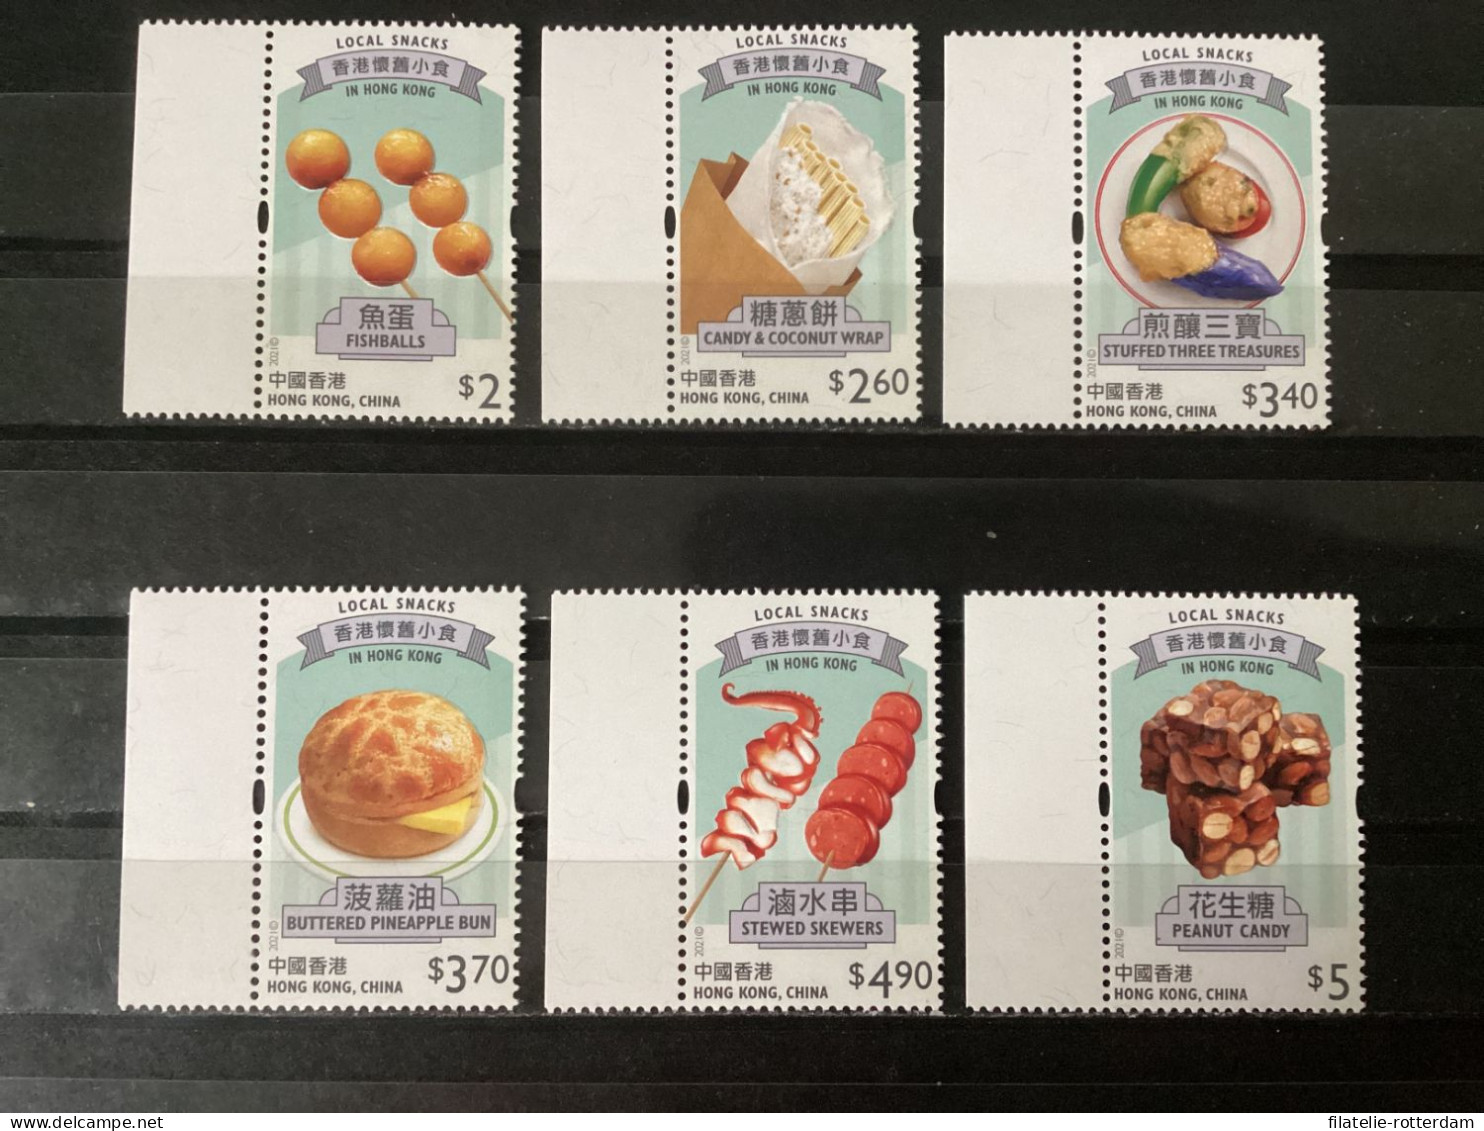 Hong Kong - Postfris / MNH - Complete Set Local Snacks 2021 - Unused Stamps